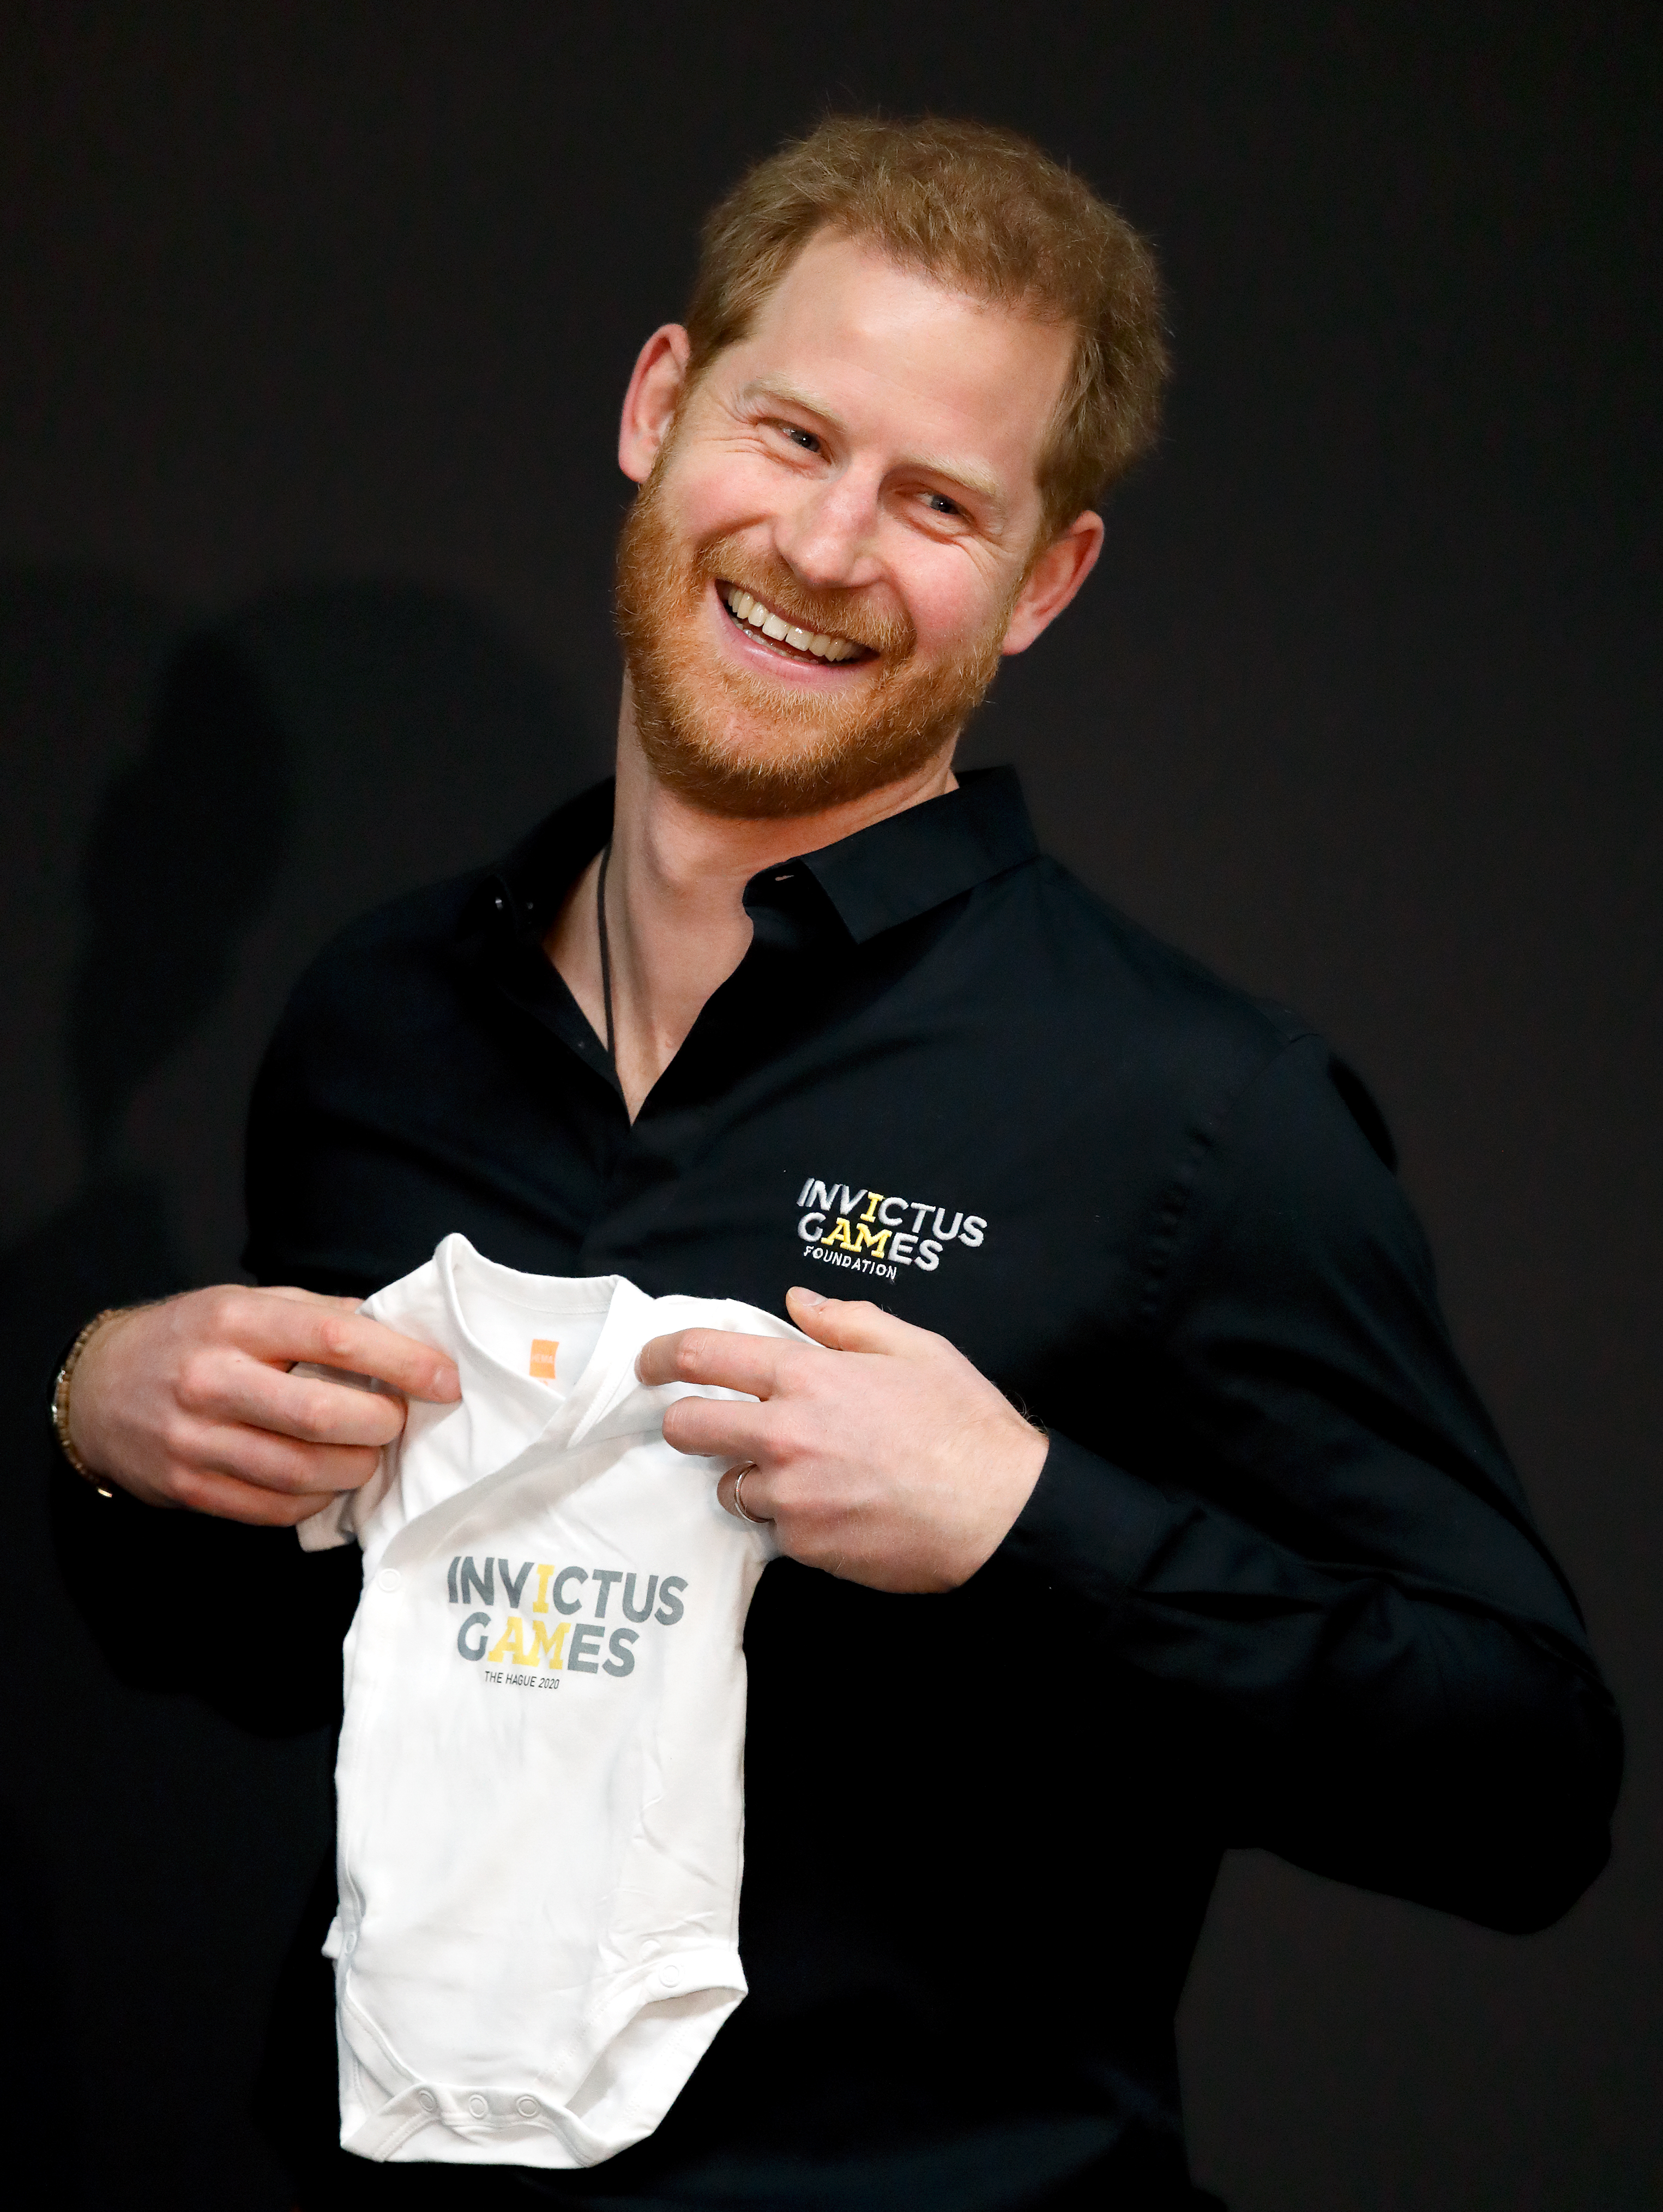 Prince Harry, Duke of Sussex is presented with an Invictus Games baby grow for Archie as he officially launches the Invictus Games in The Hague, Netherlands, on May 9, 2019. | Source: Getty Images